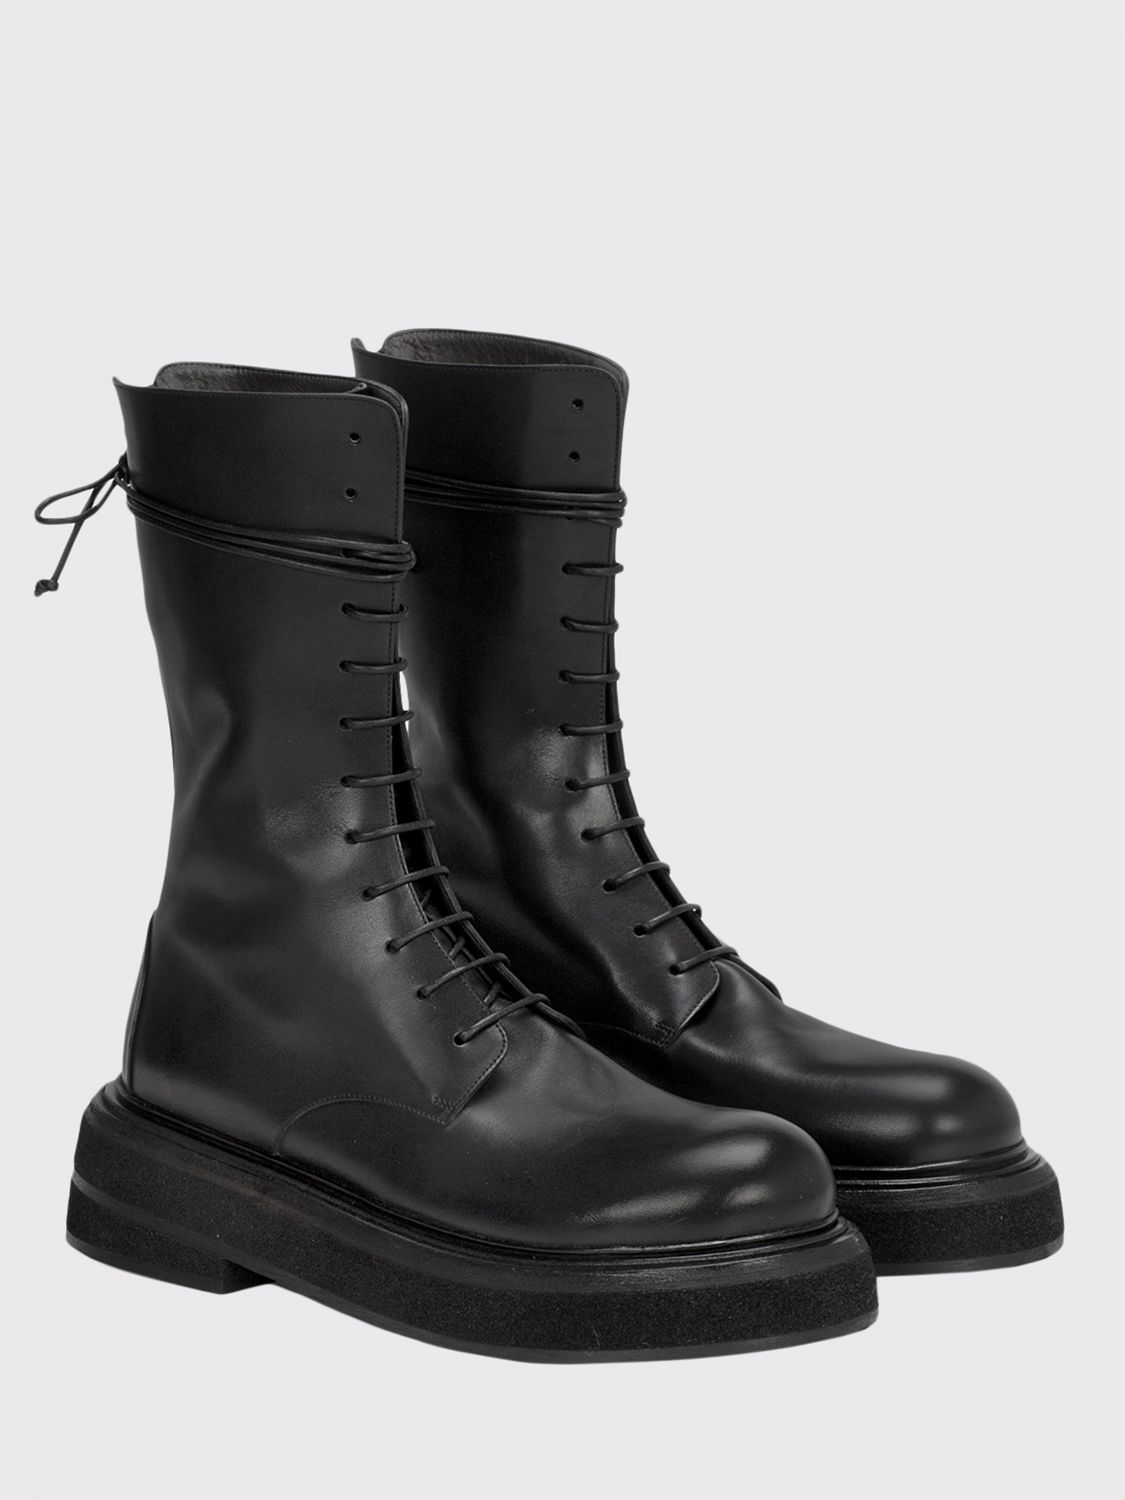 Marsèll Outlet: Zuccone leather boot - Black | Marsèll boots MM4278118 ...